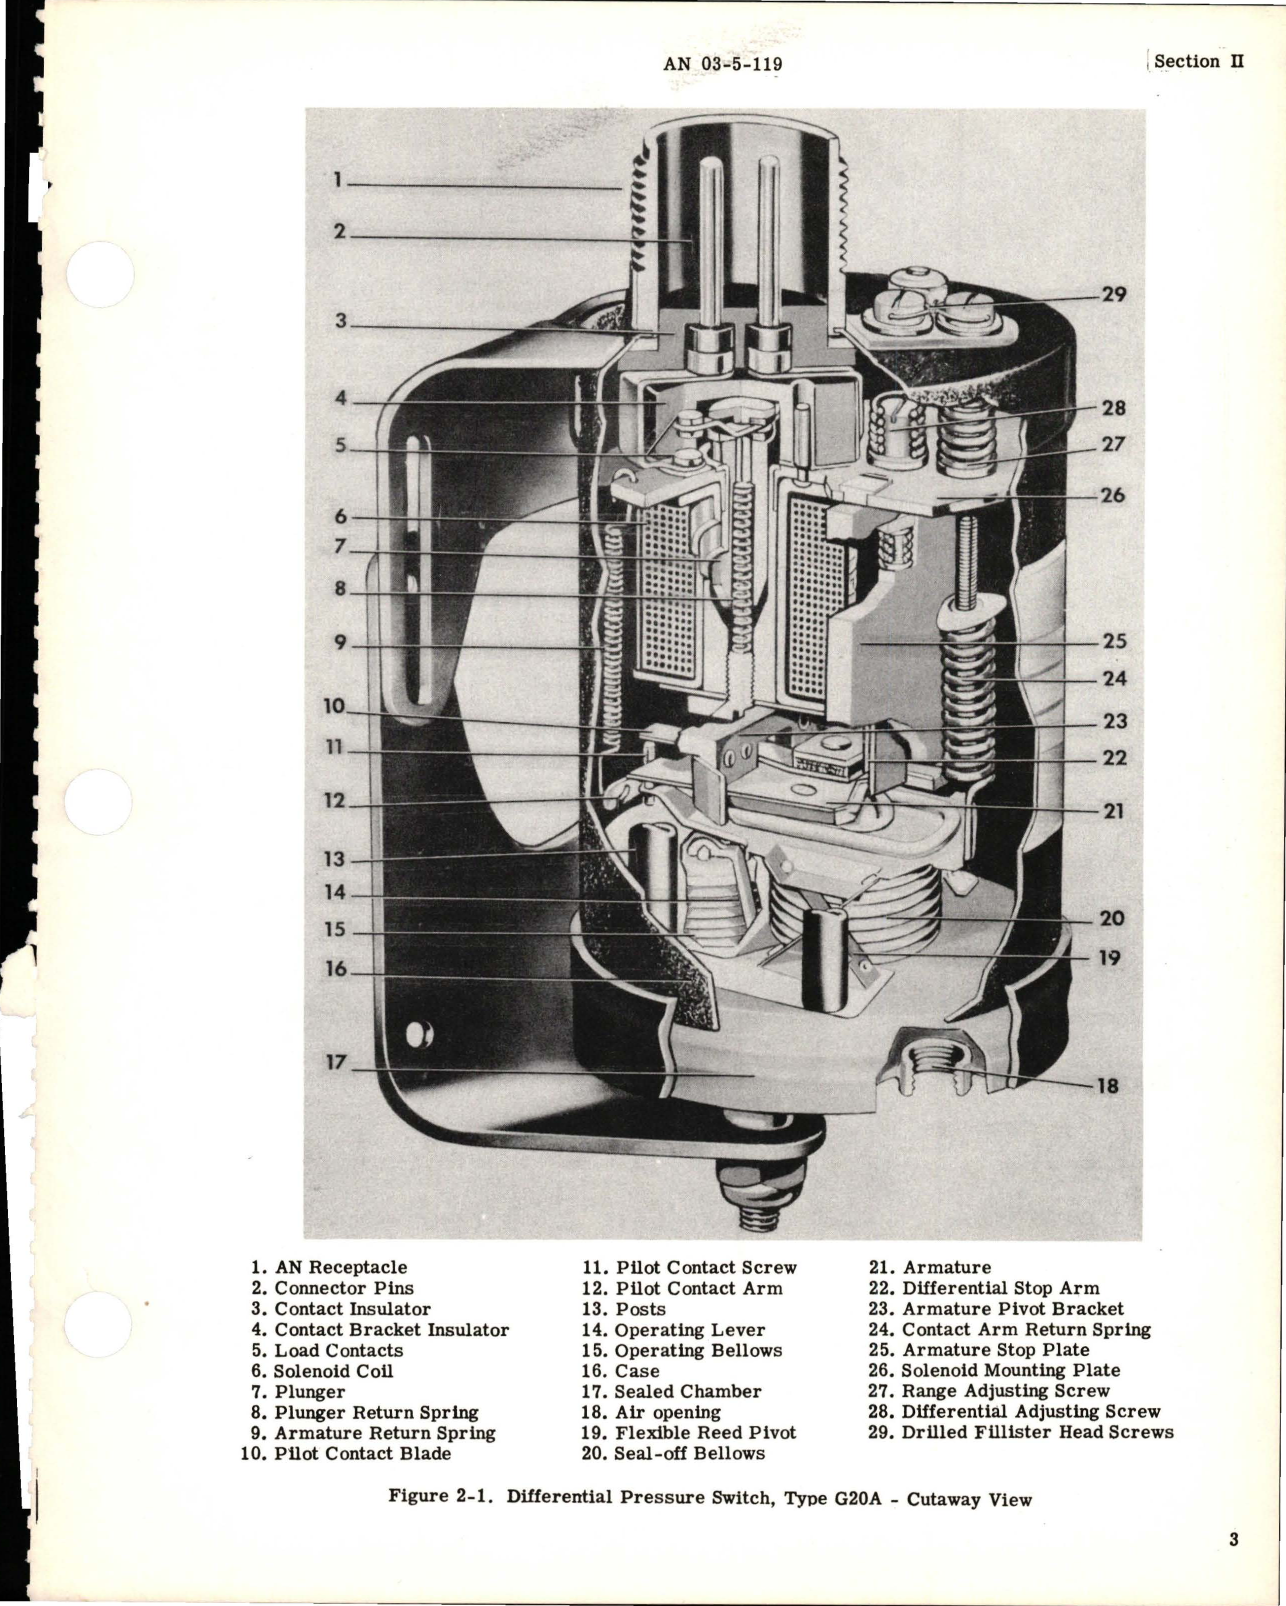 Sample page 5 from AirCorps Library document: Overhaul Instructions for Differential Pressure Switch - Type G20A